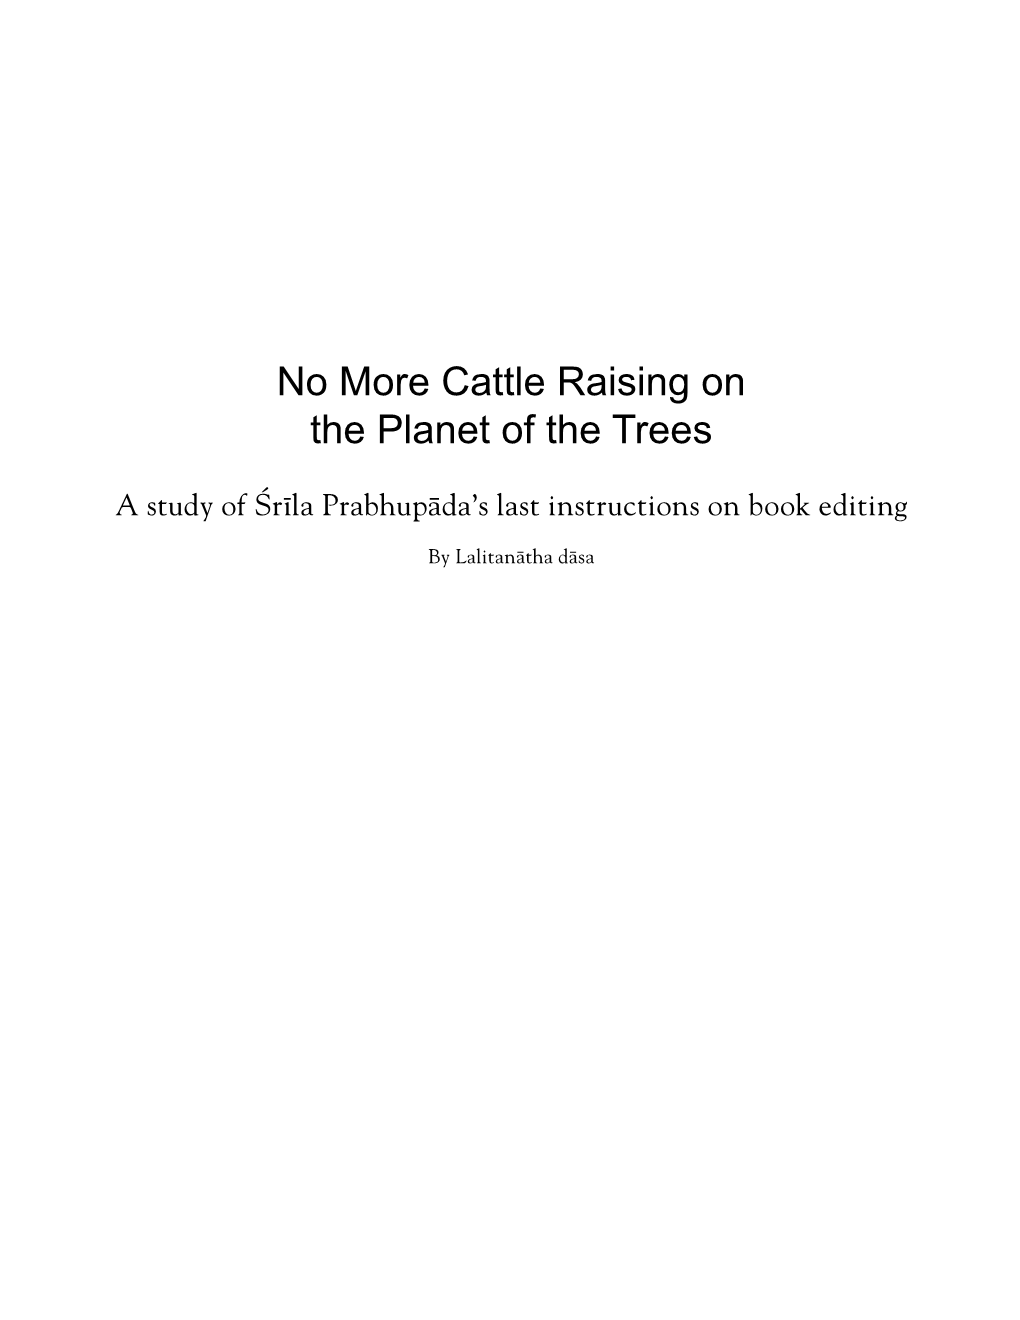 No More Cattle Raising on the Planet of the Trees